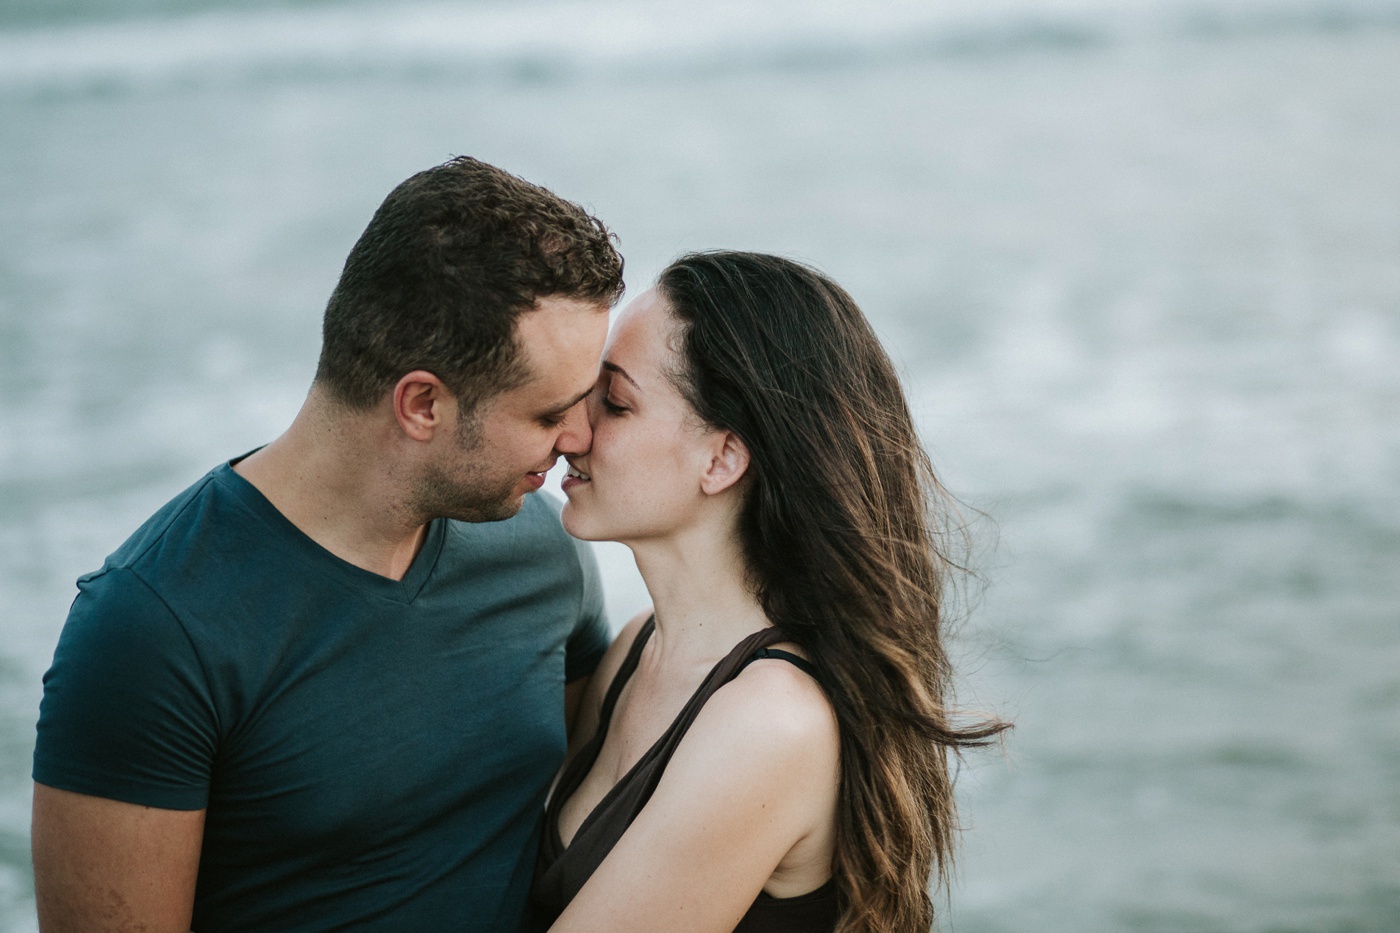 Deb-Ibs_Bali-Beach-Relaxed-Engagement-Session_Destination-Wedding-Photography_Melbourne-Wedding-Photographer_25